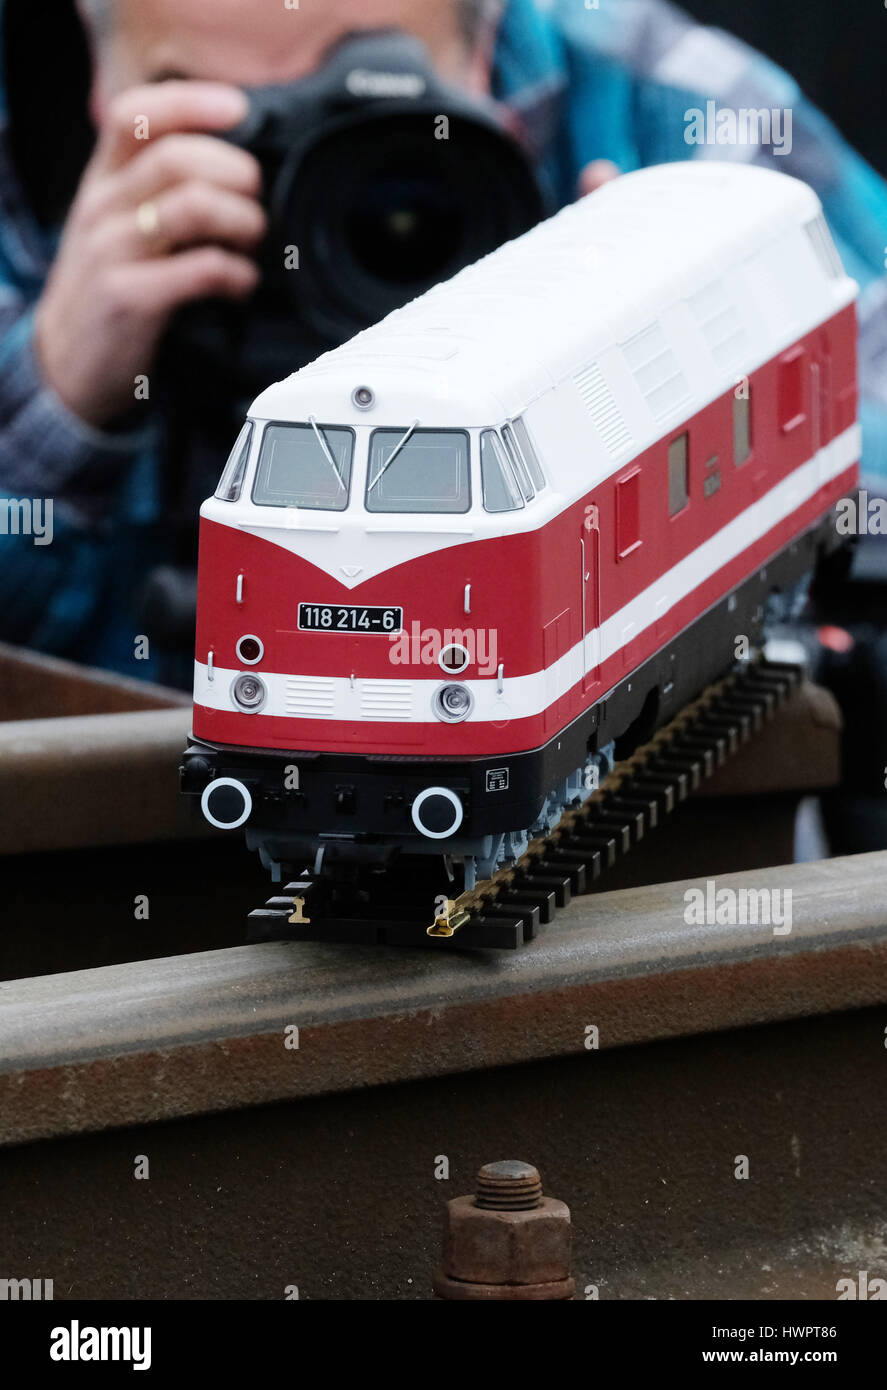 A model of the Diesel locomotive BR 118 of the Piko Toy GmbH can be seen in  Glauchau, Germany, 22 March 2017. The train series 118 was one of the most  built